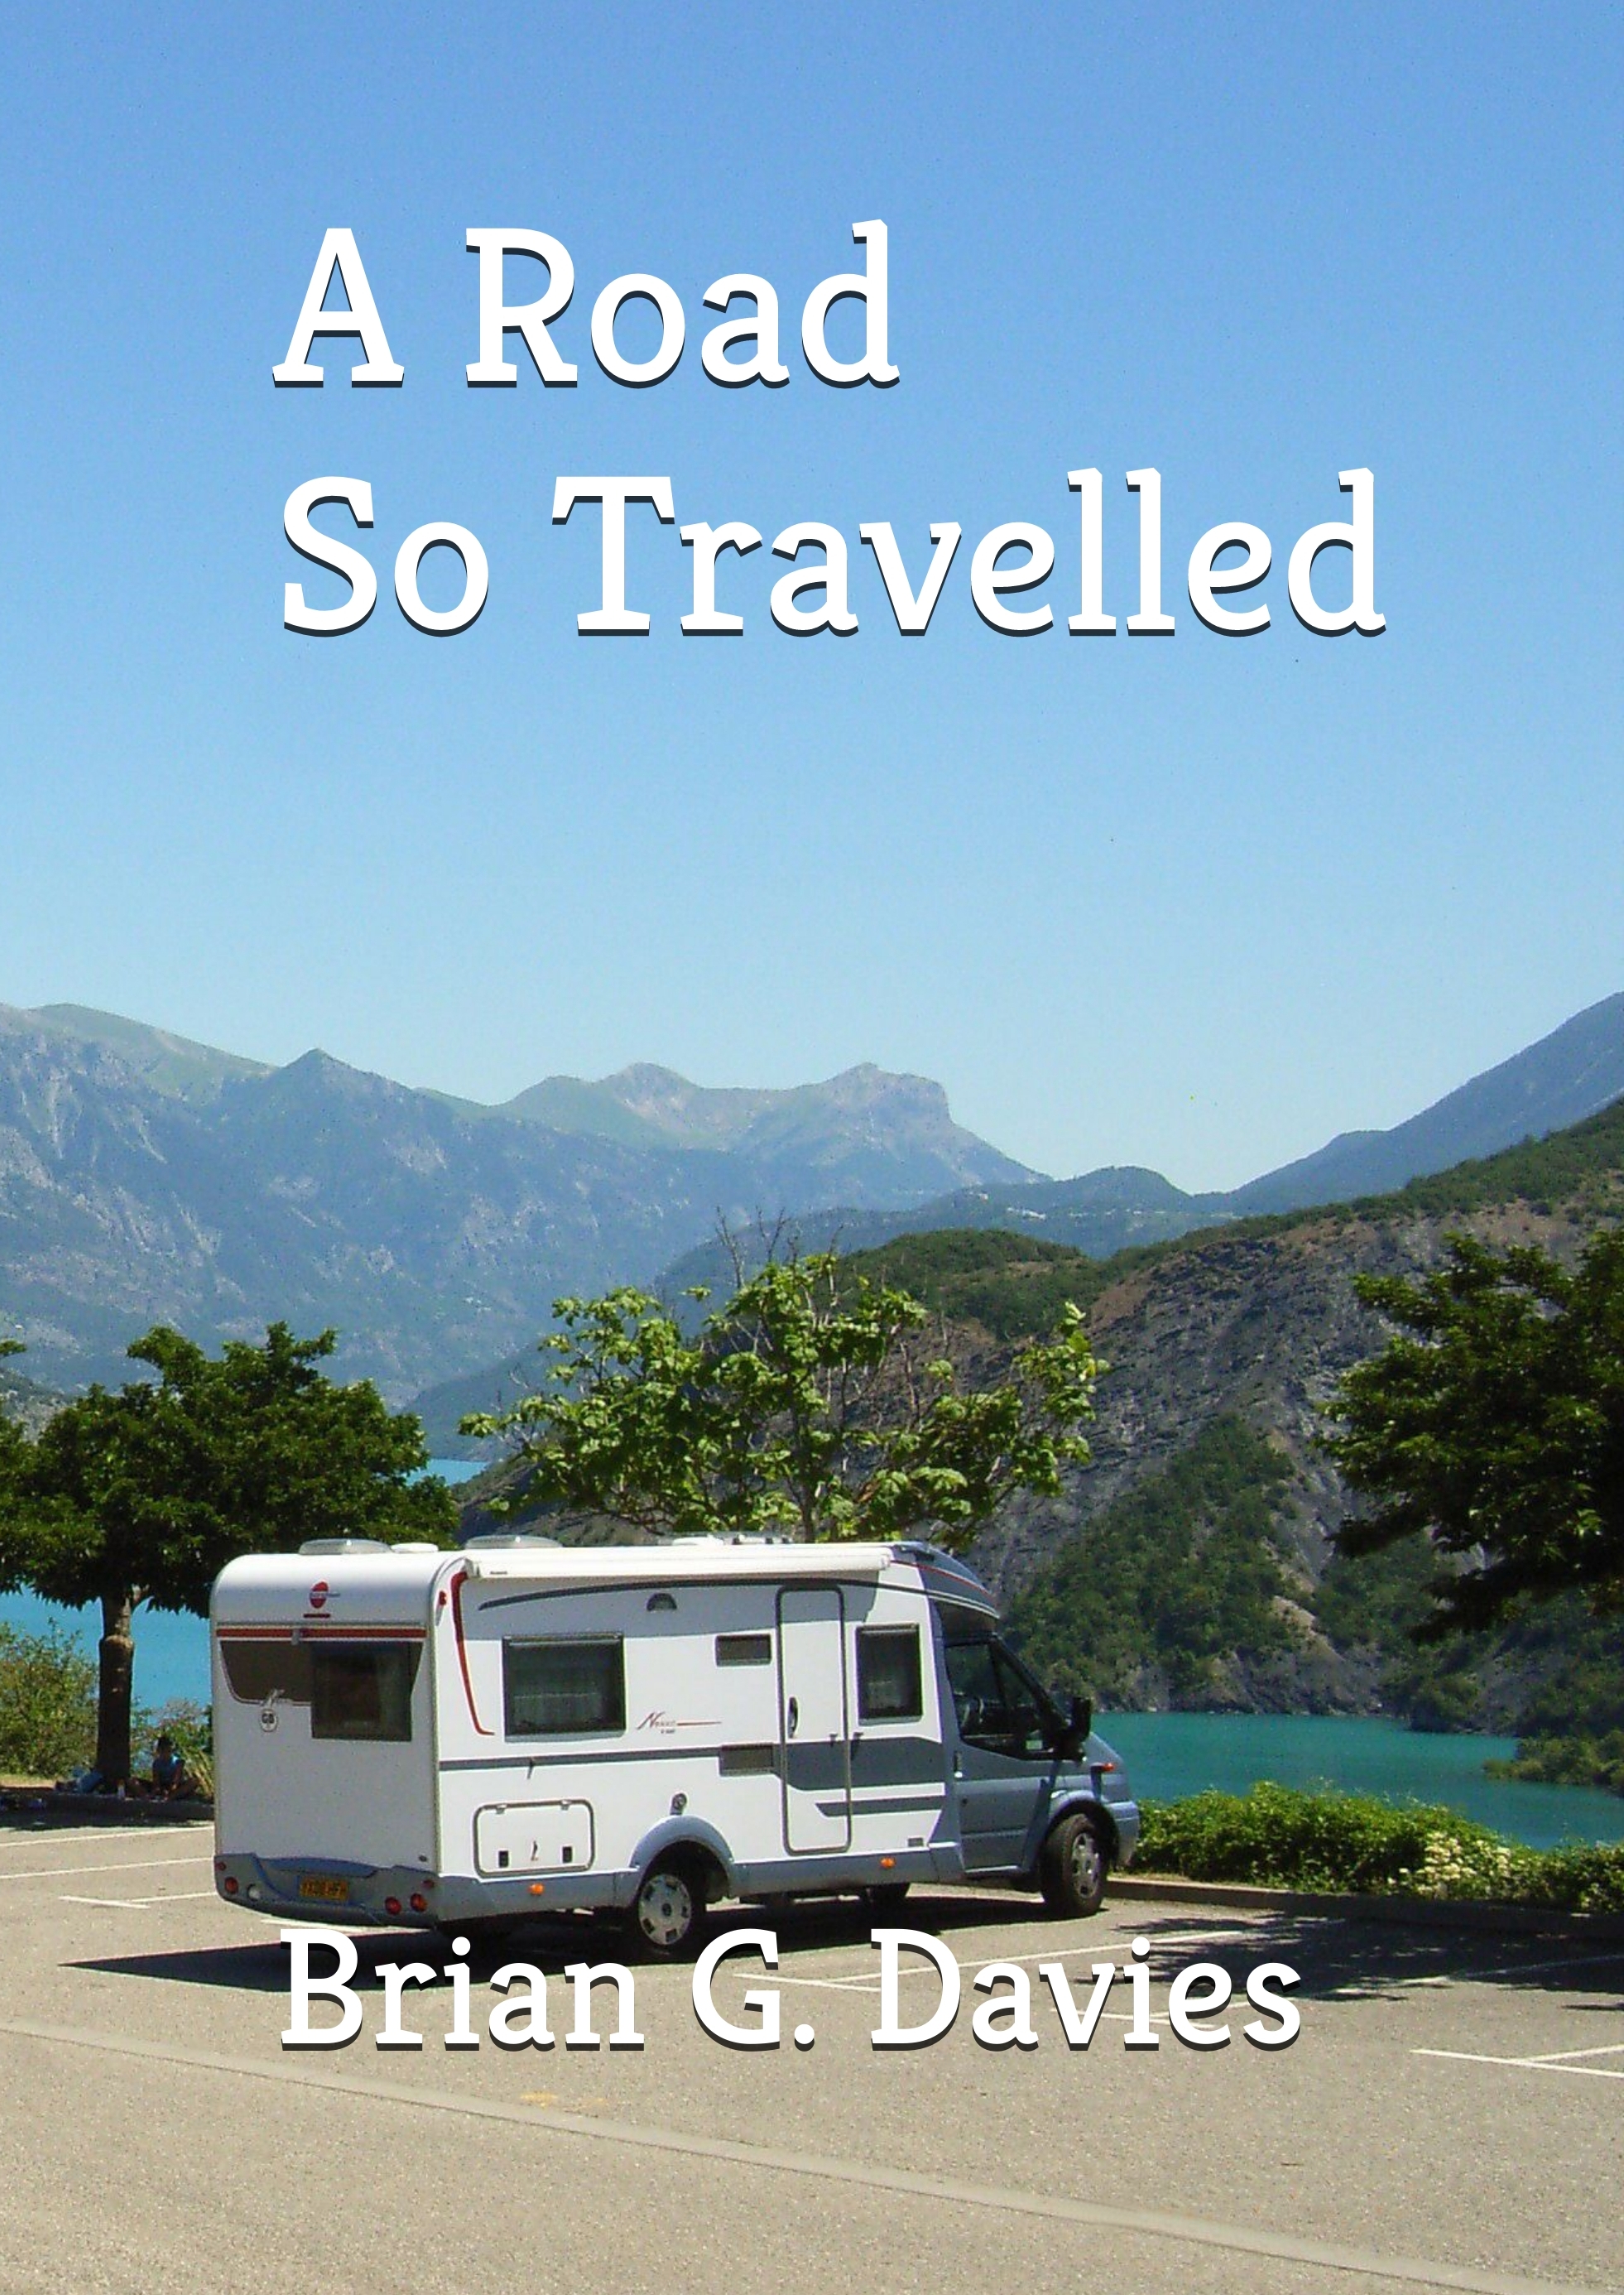 A Road So Travelled by Brian G. Davies